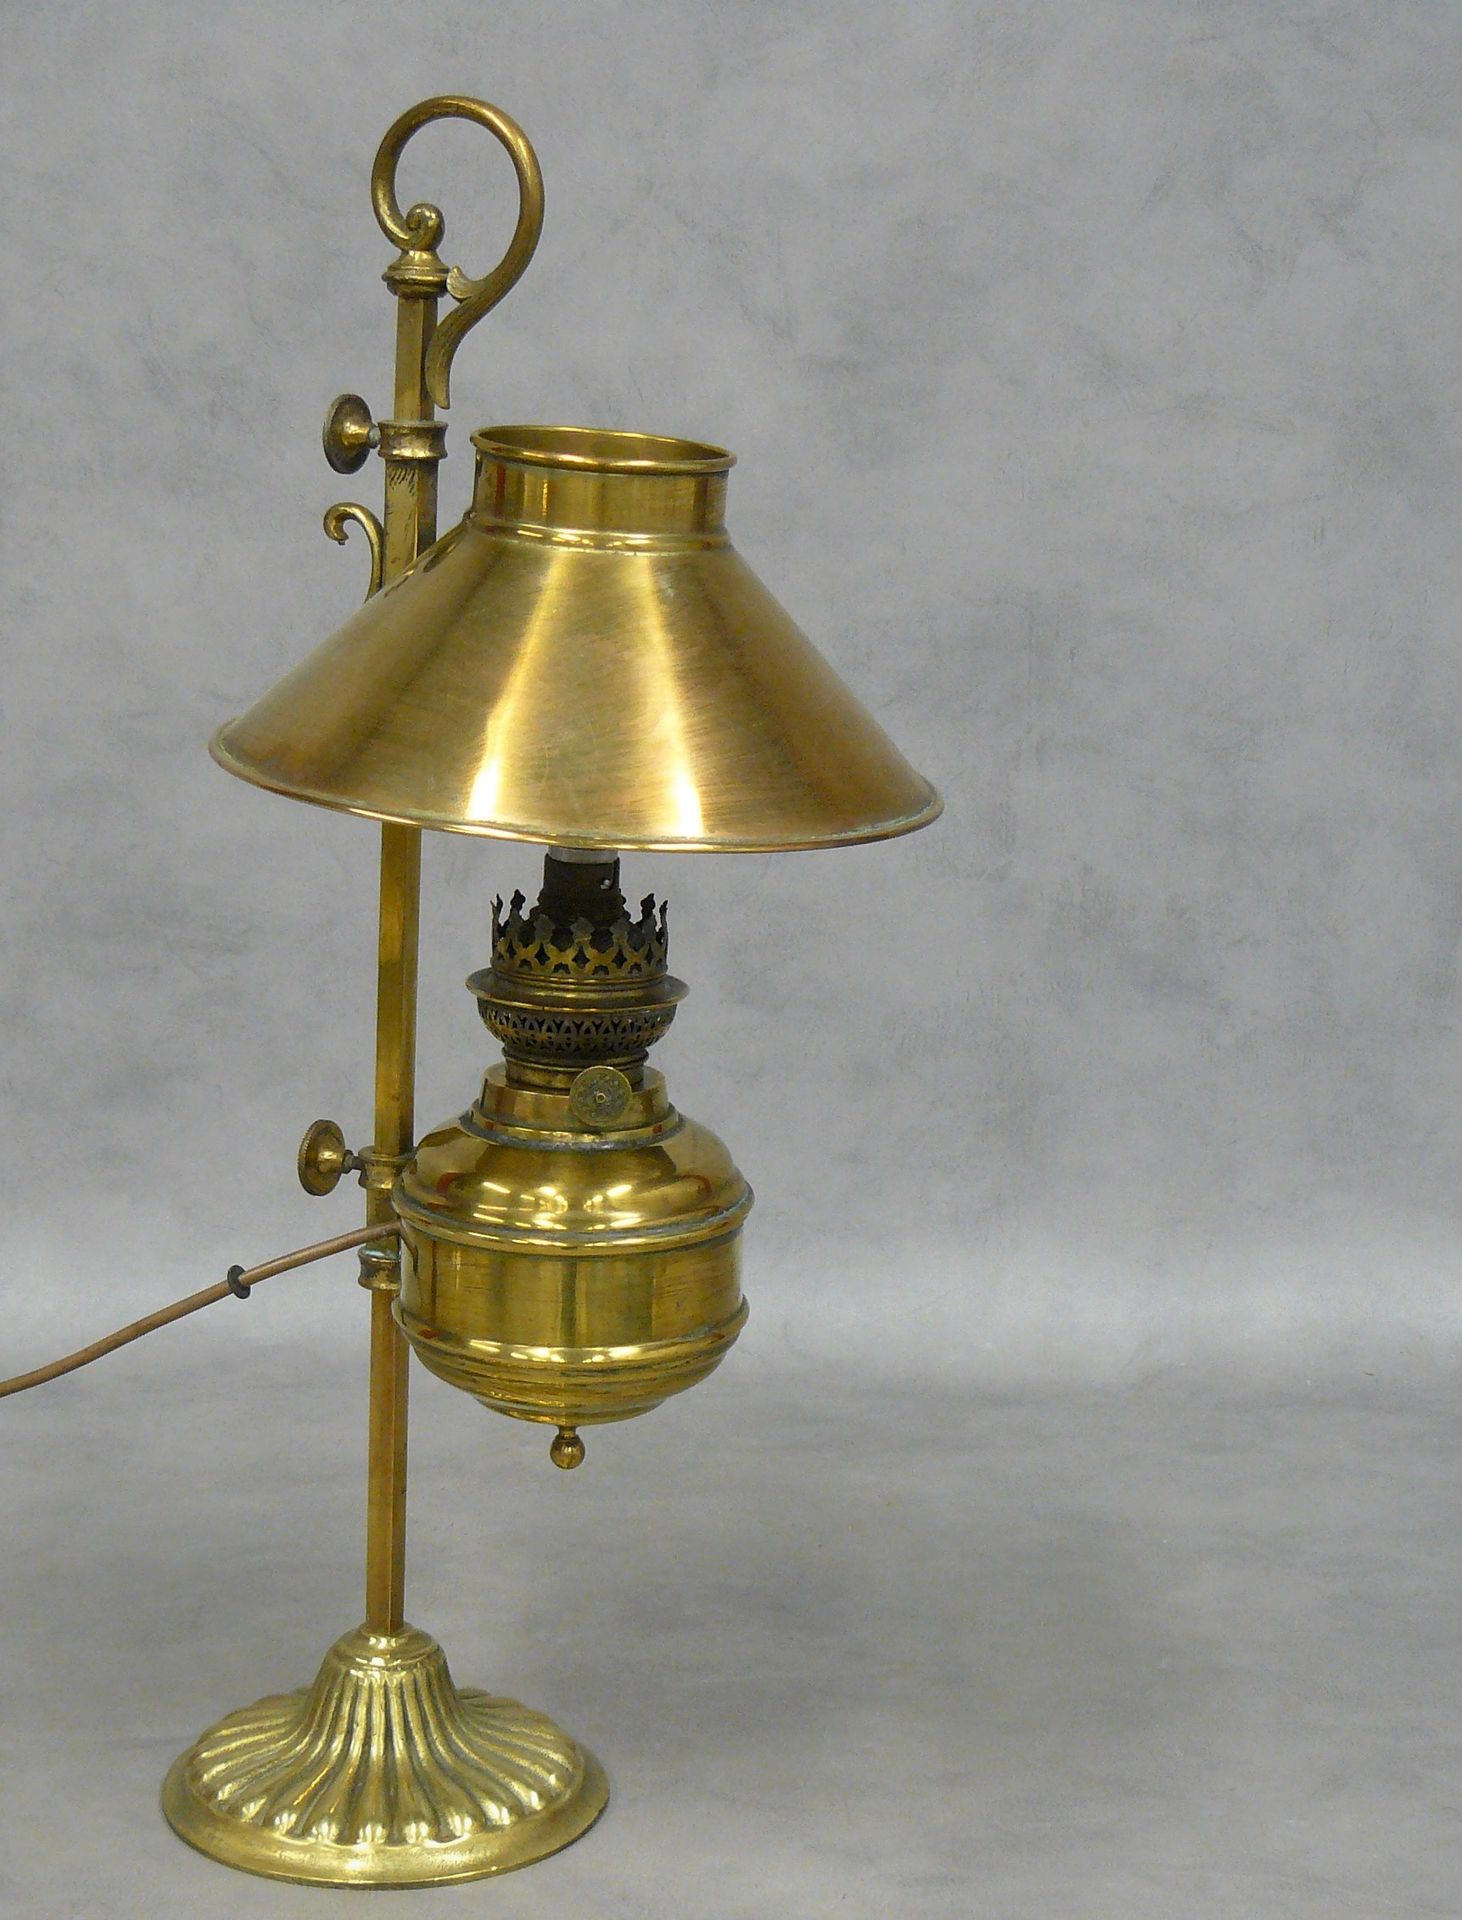 Null a brass oil lamp adjustable in height with its shade - H 56 cm